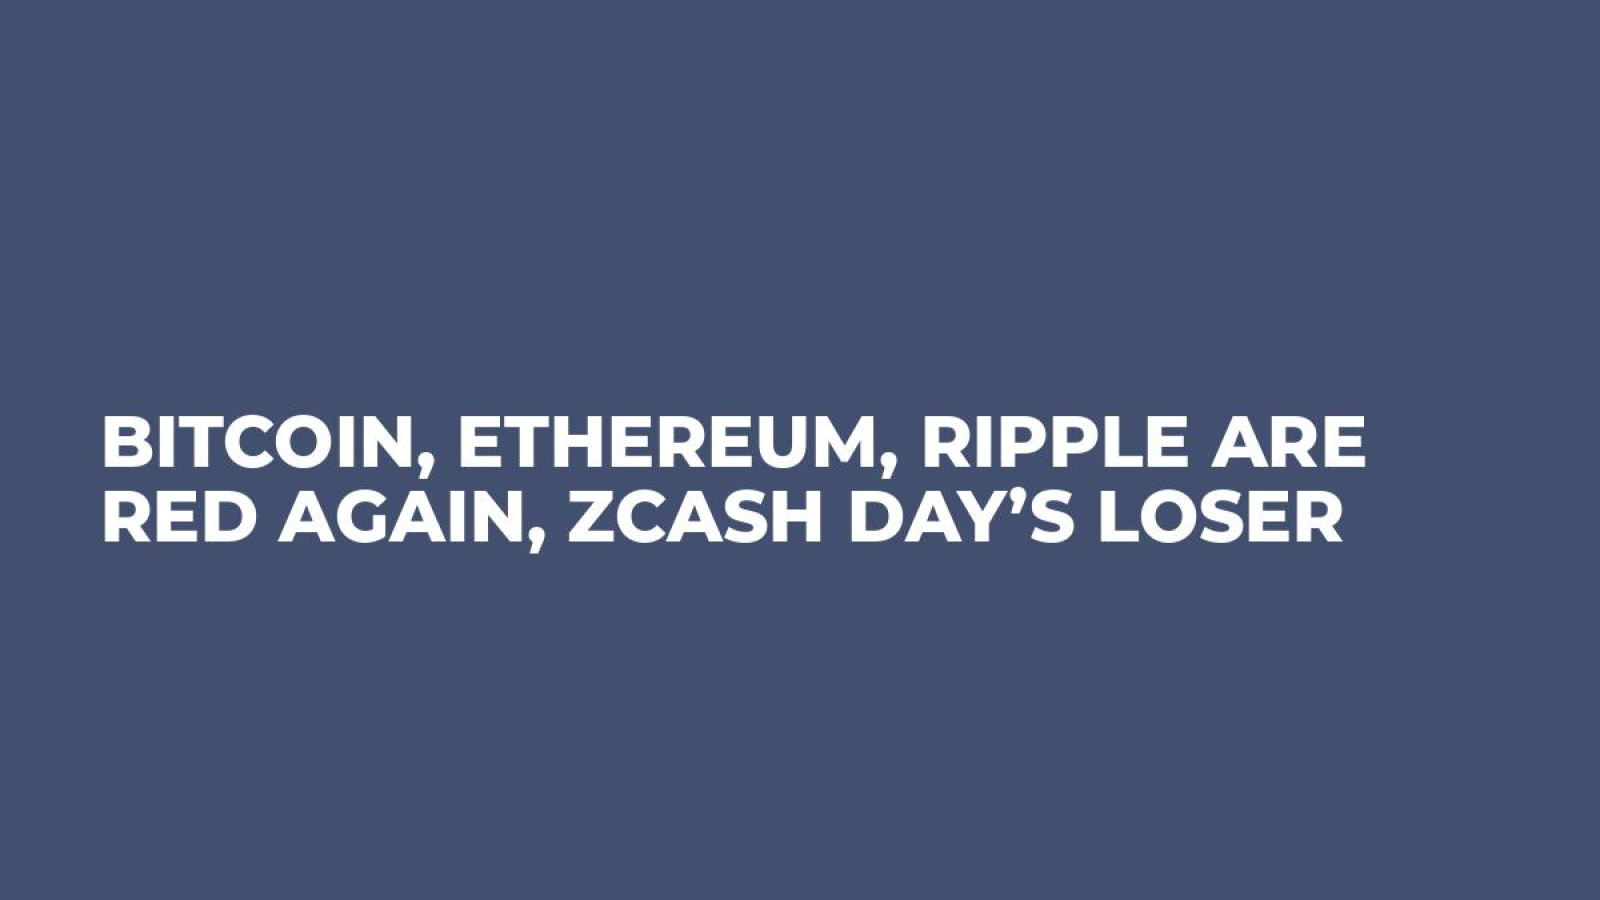 Bitcoin, Ethereum, Ripple Are Red Again, Zcash Day’s Loser